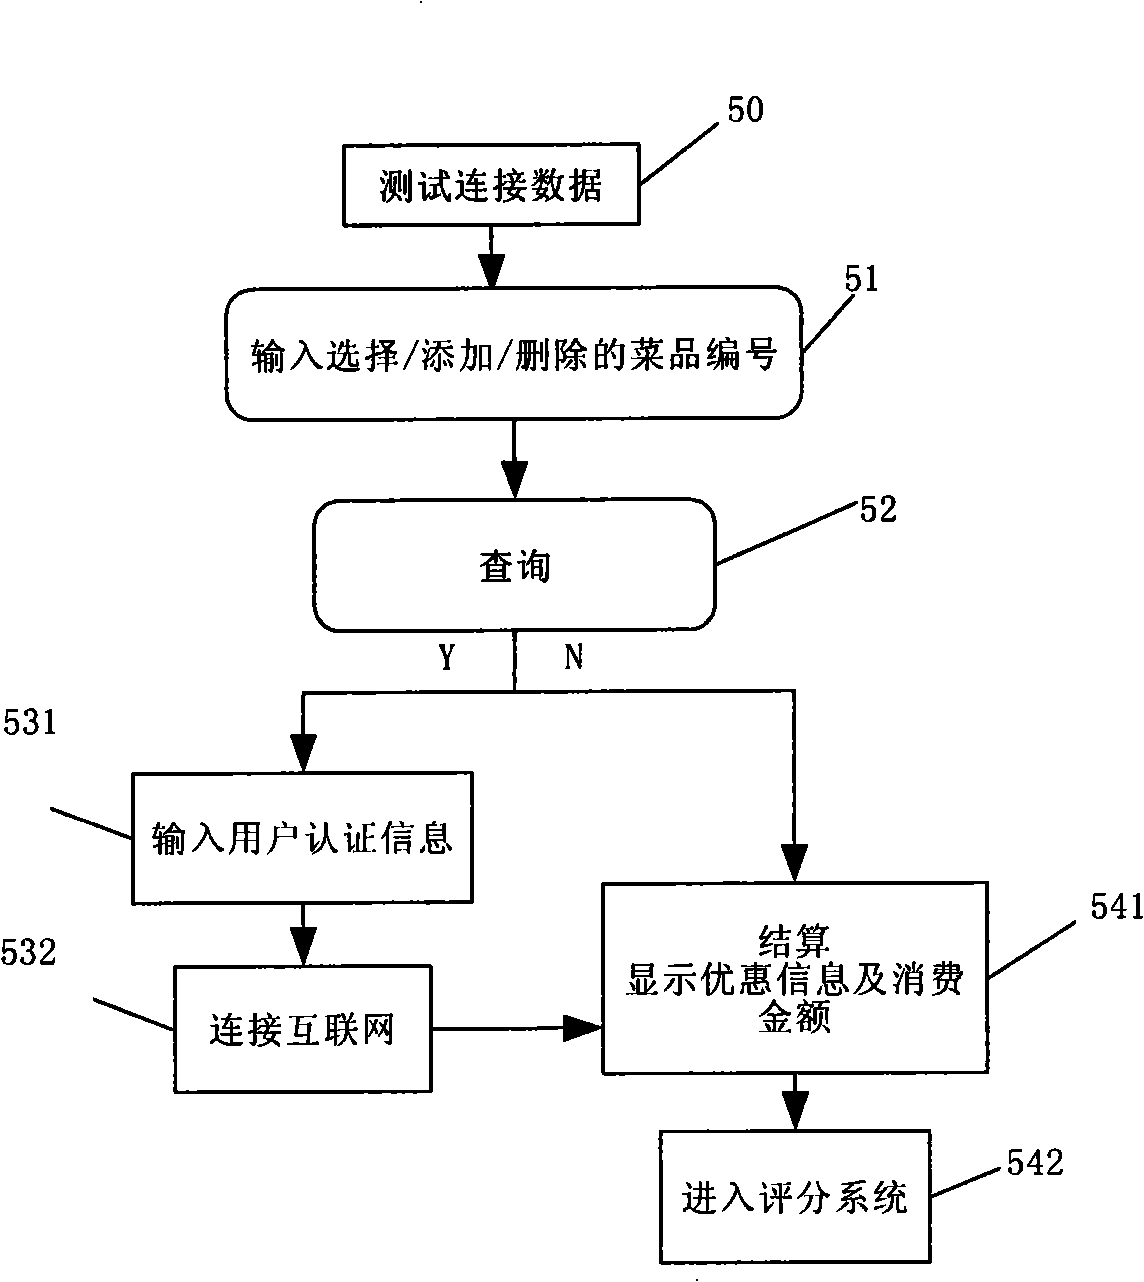 Method and system for automatically ordering dishes and settling account